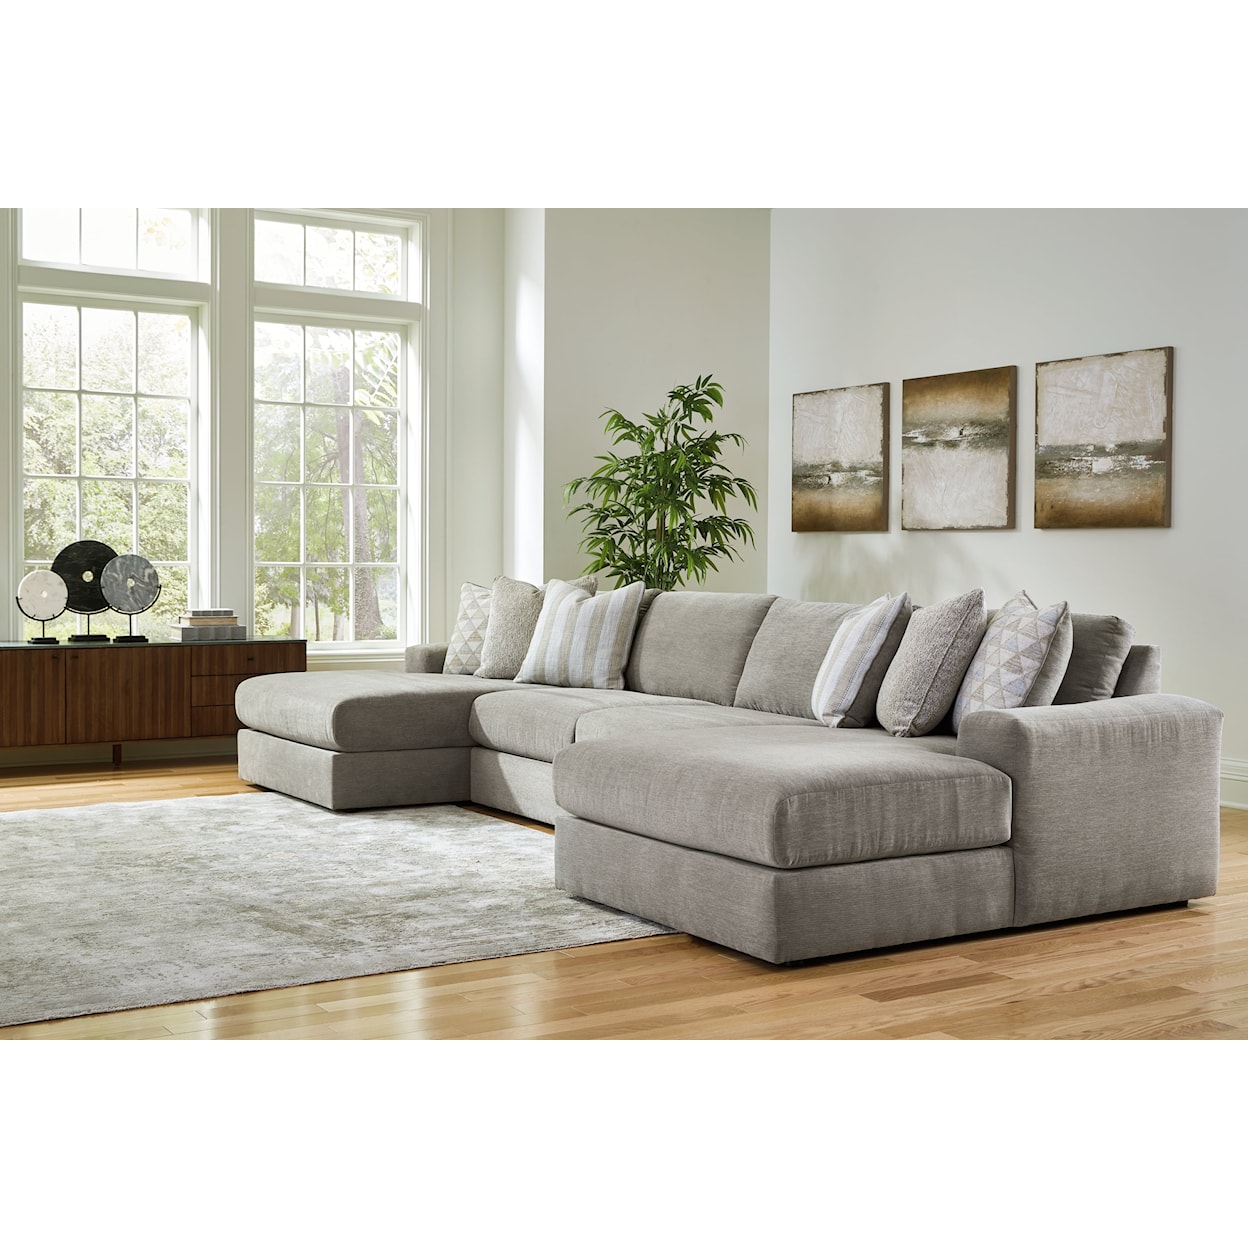 Signature Avaliyah 4-Piece Double Chaise Sectional